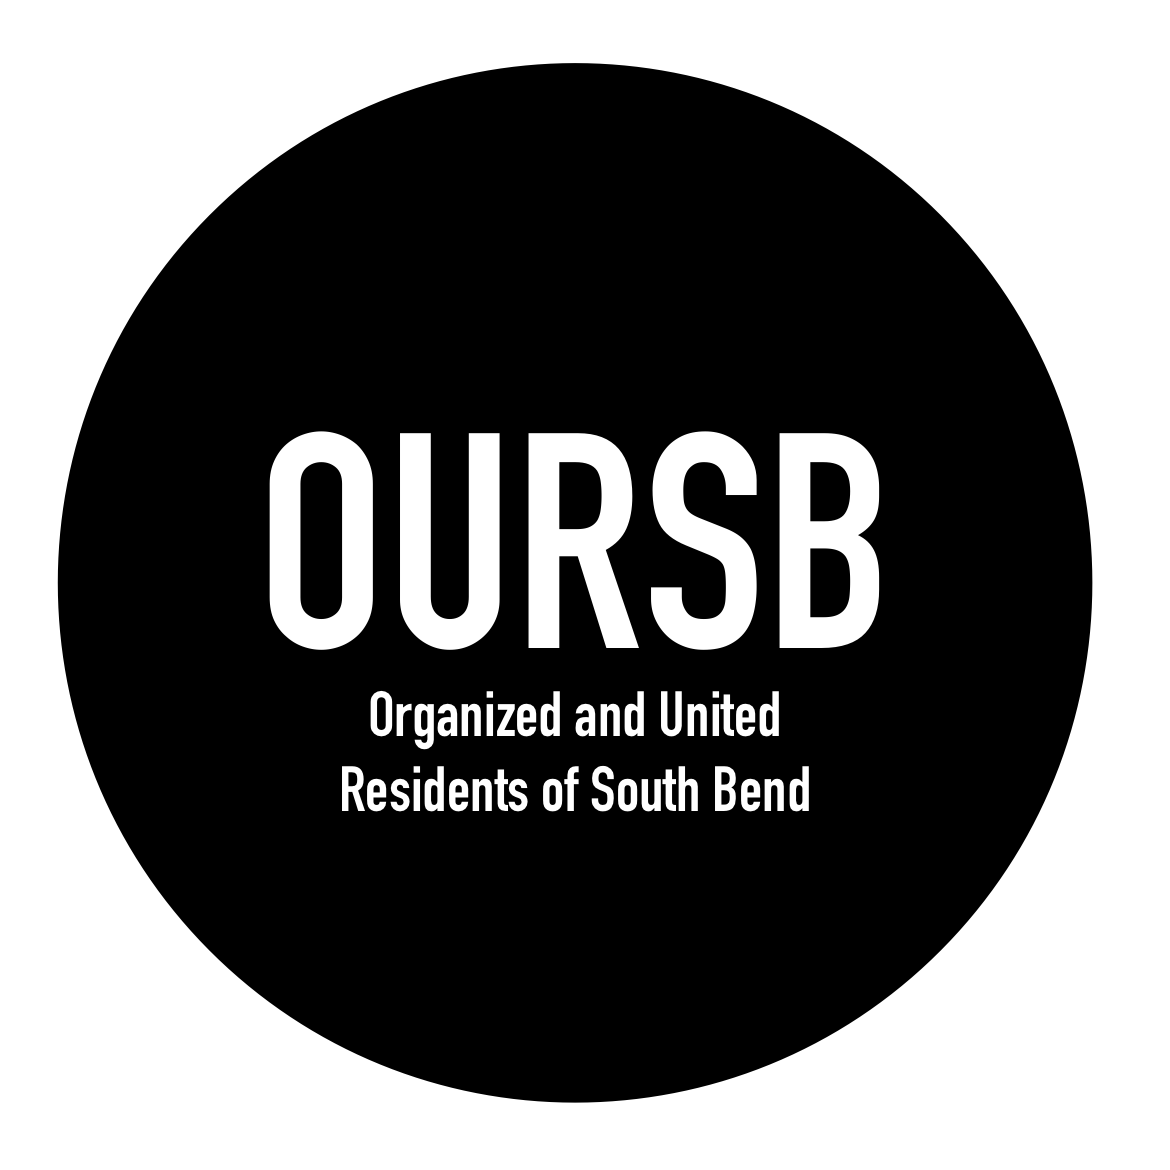 Artwork for OURSB